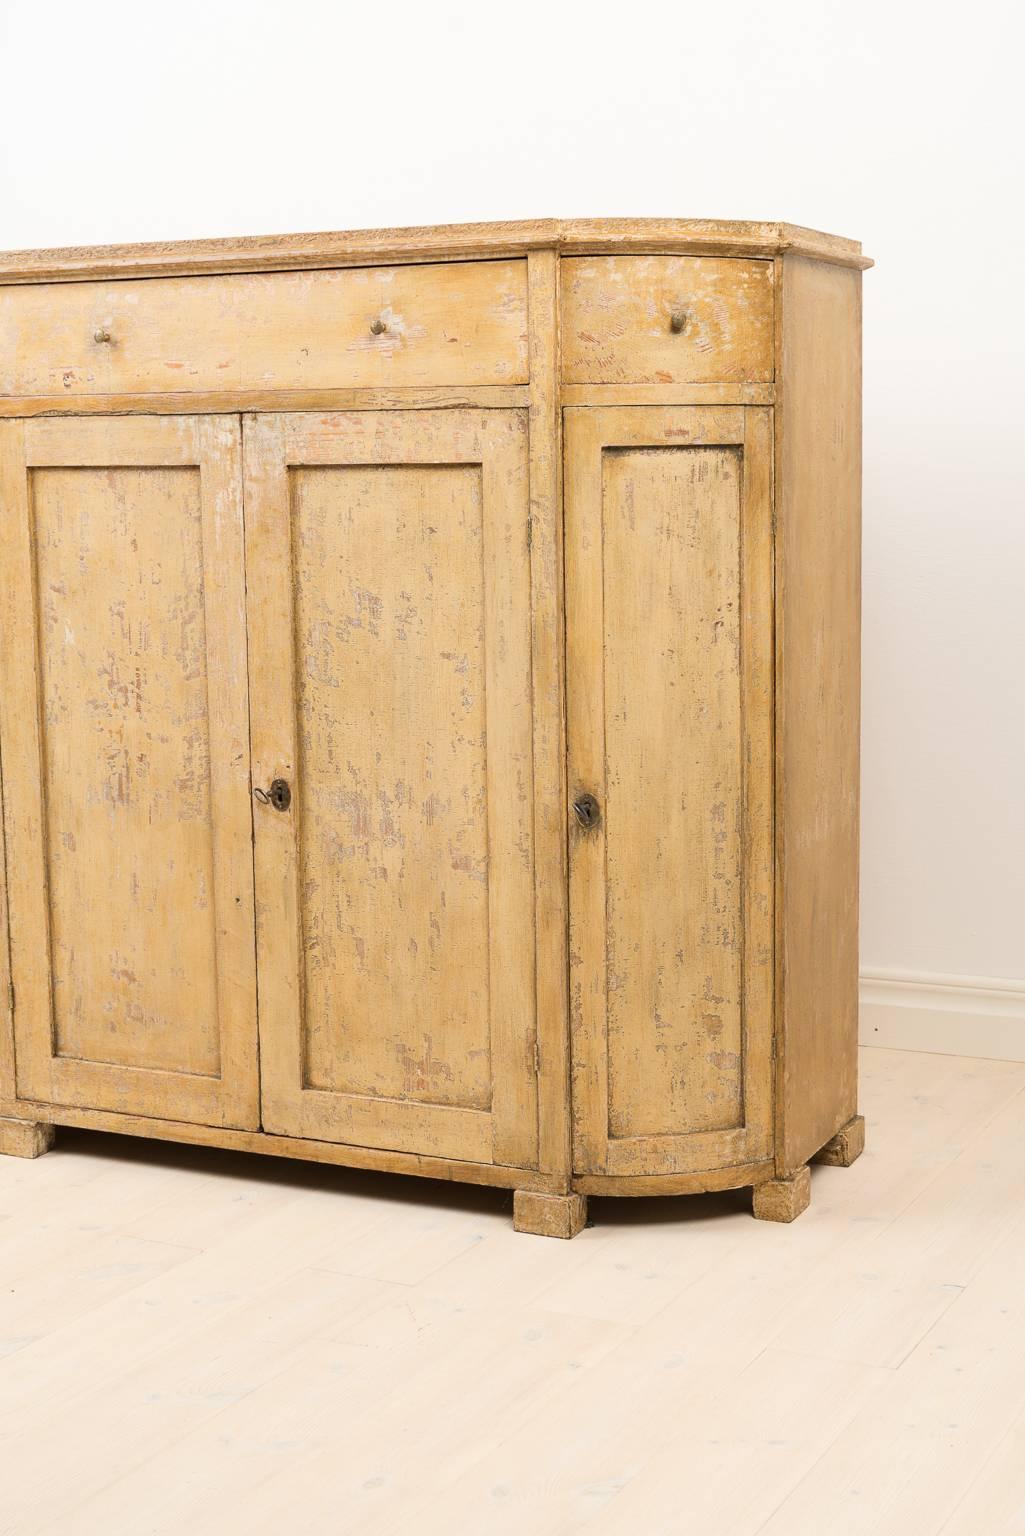 The sideboard has been dry scraped to original paint. Manufactured in the early 1800s.